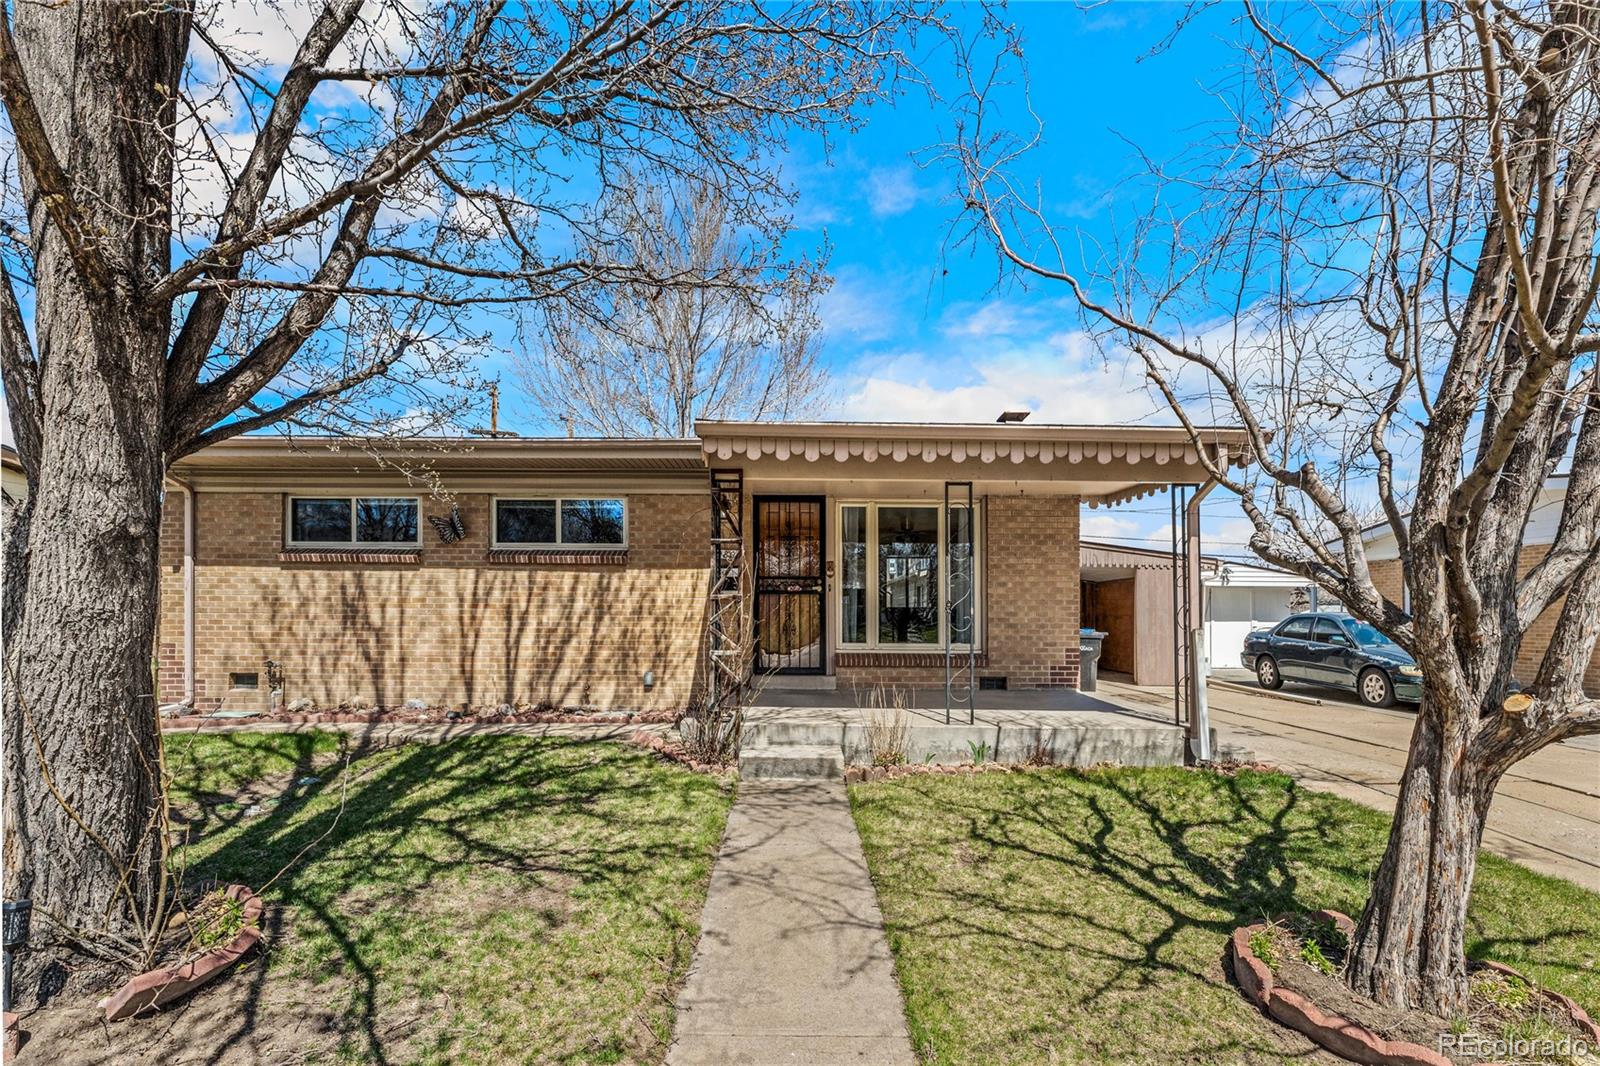 9807 W 57th Place, arvada MLS: 2505067 Beds: 3 Baths: 1 Price: $445,000